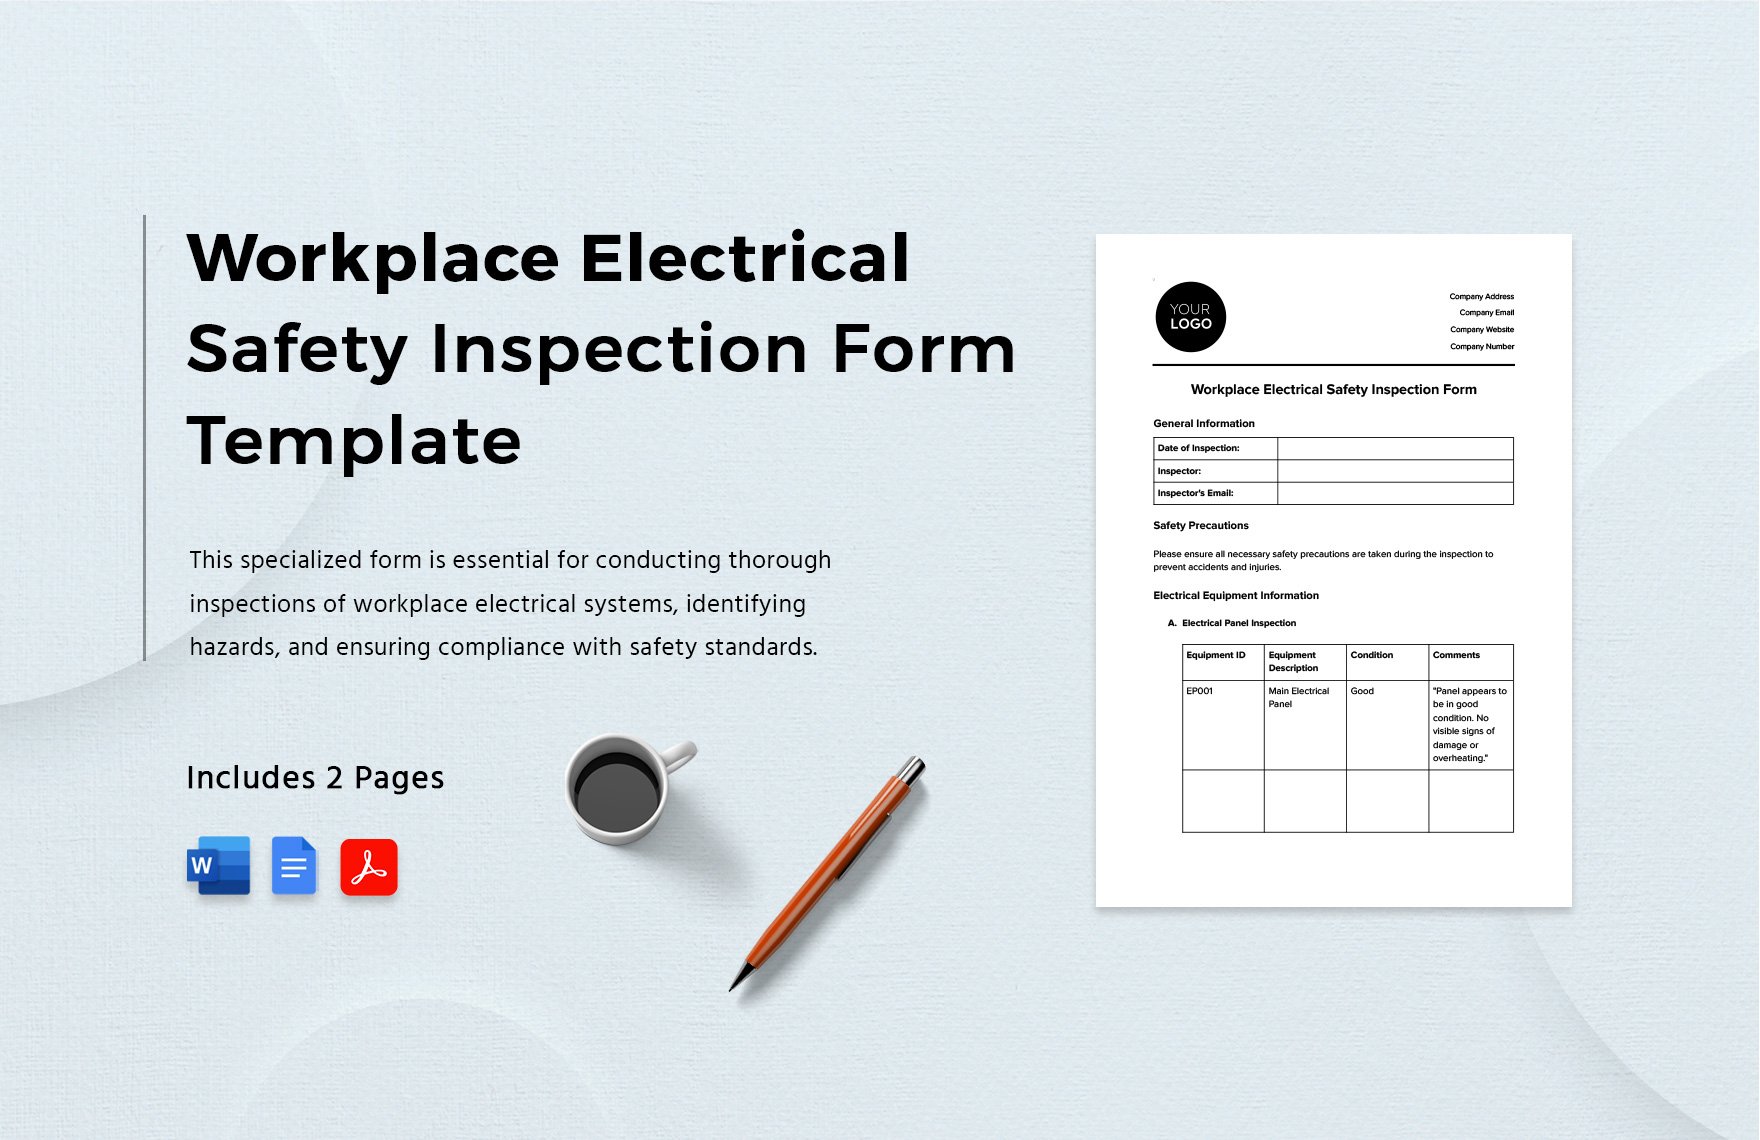 Workplace Electrical Safety Inspection Form Template in Word, Google Docs, PDF